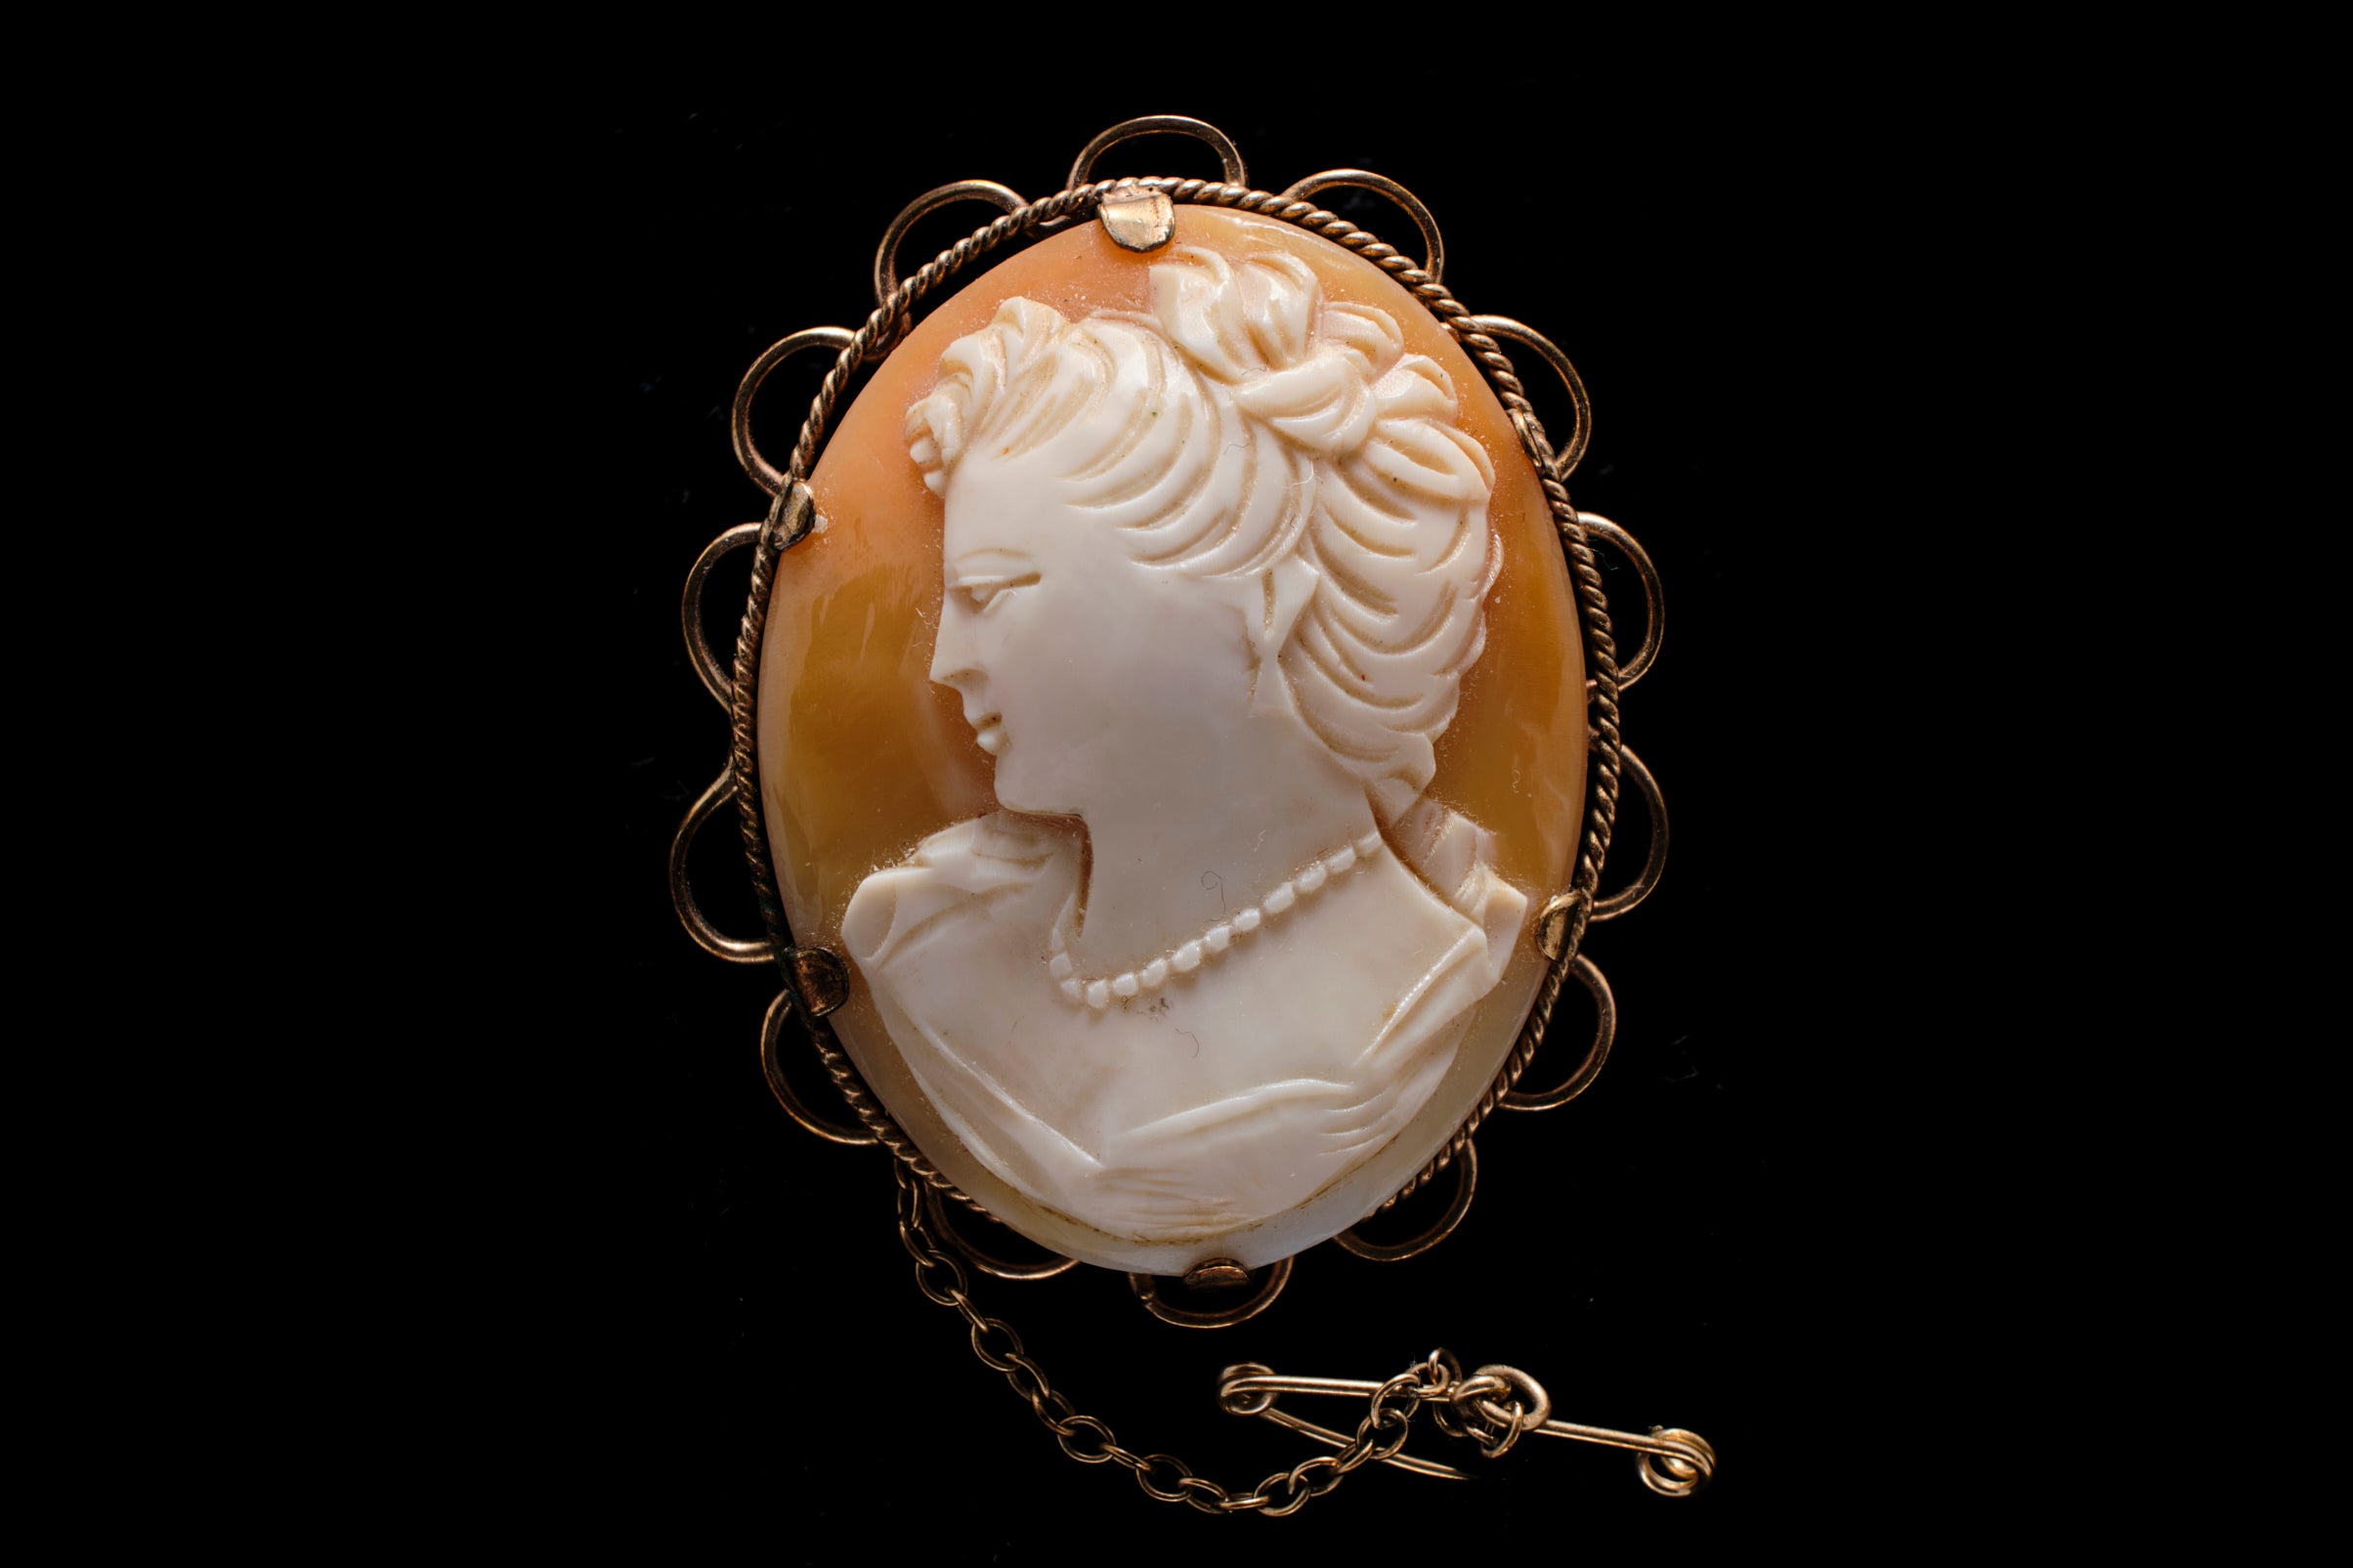 Edwardian Cameo Brooch in a 9ct Gold Cage.